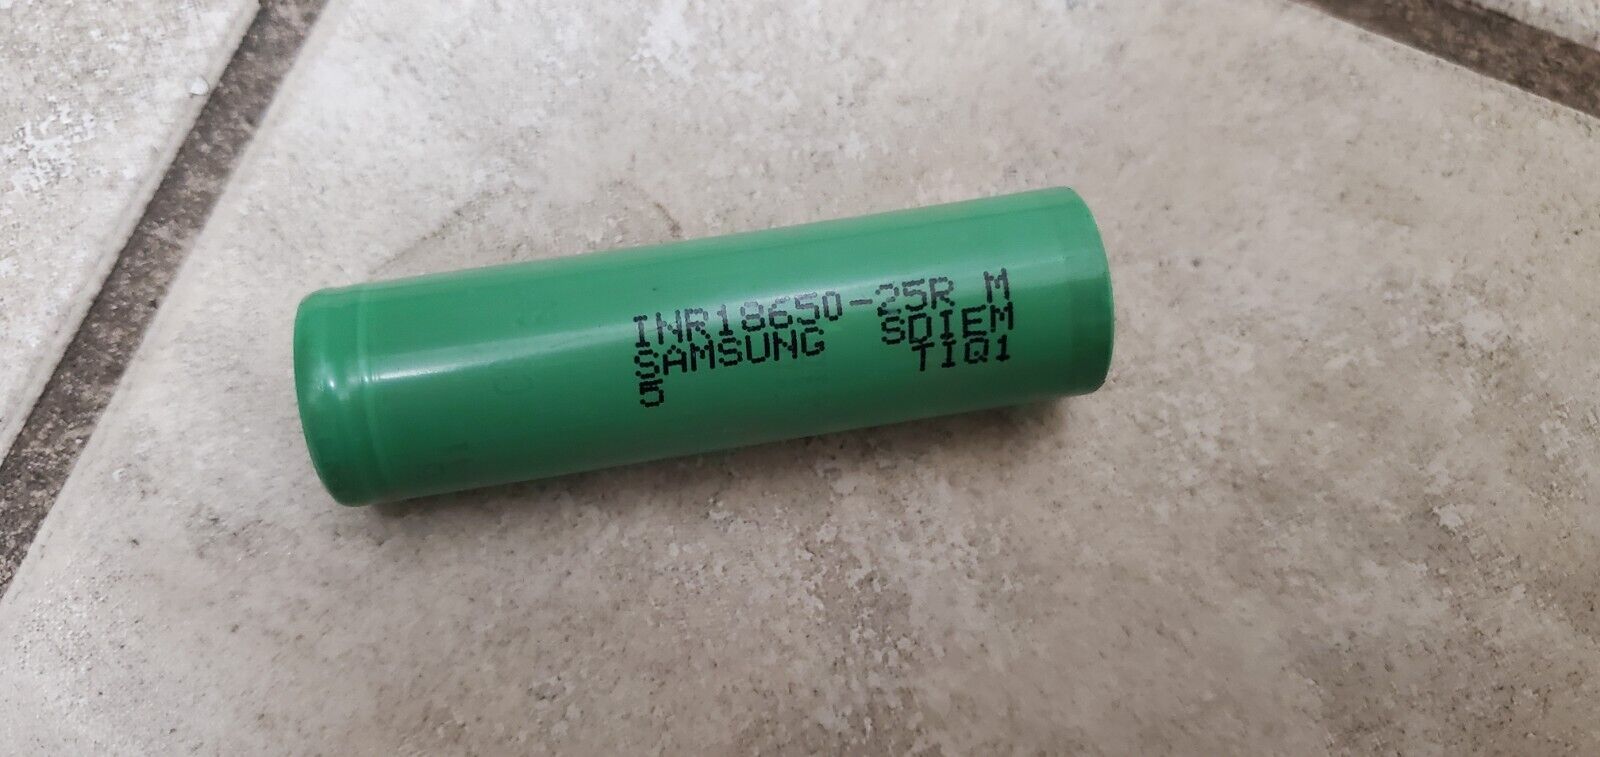 Samsung 18650 Ion Lithium Cells (Completely Dead) Lithium Recovery Lot 